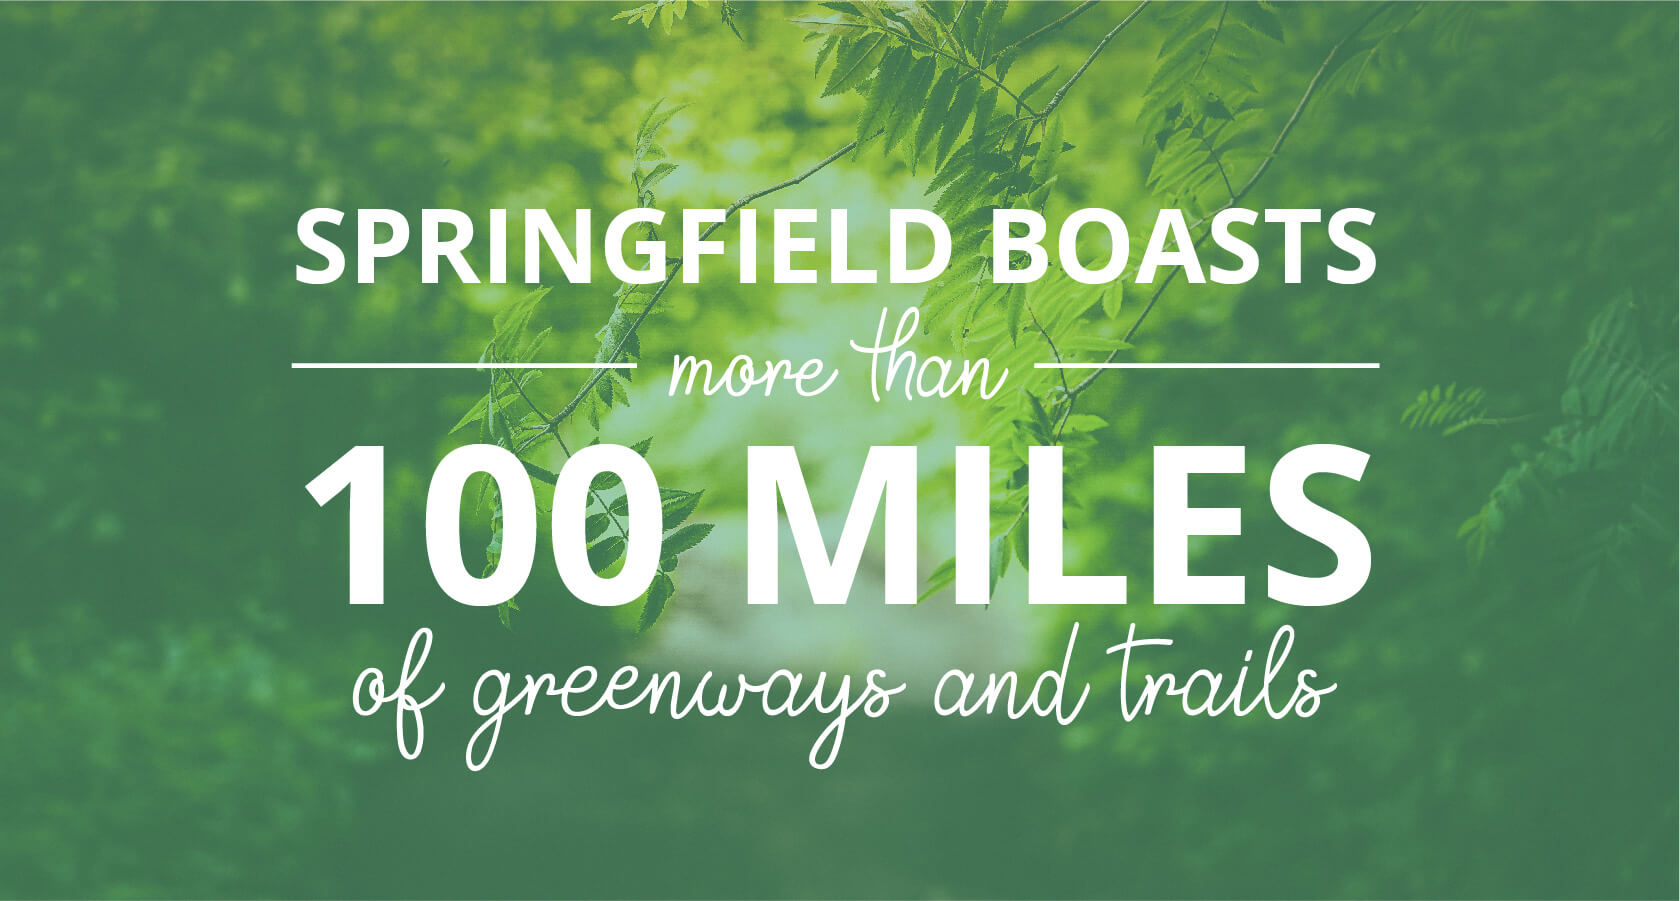 Springfield Boasts More Than 100 Miles of Greenways and Trails